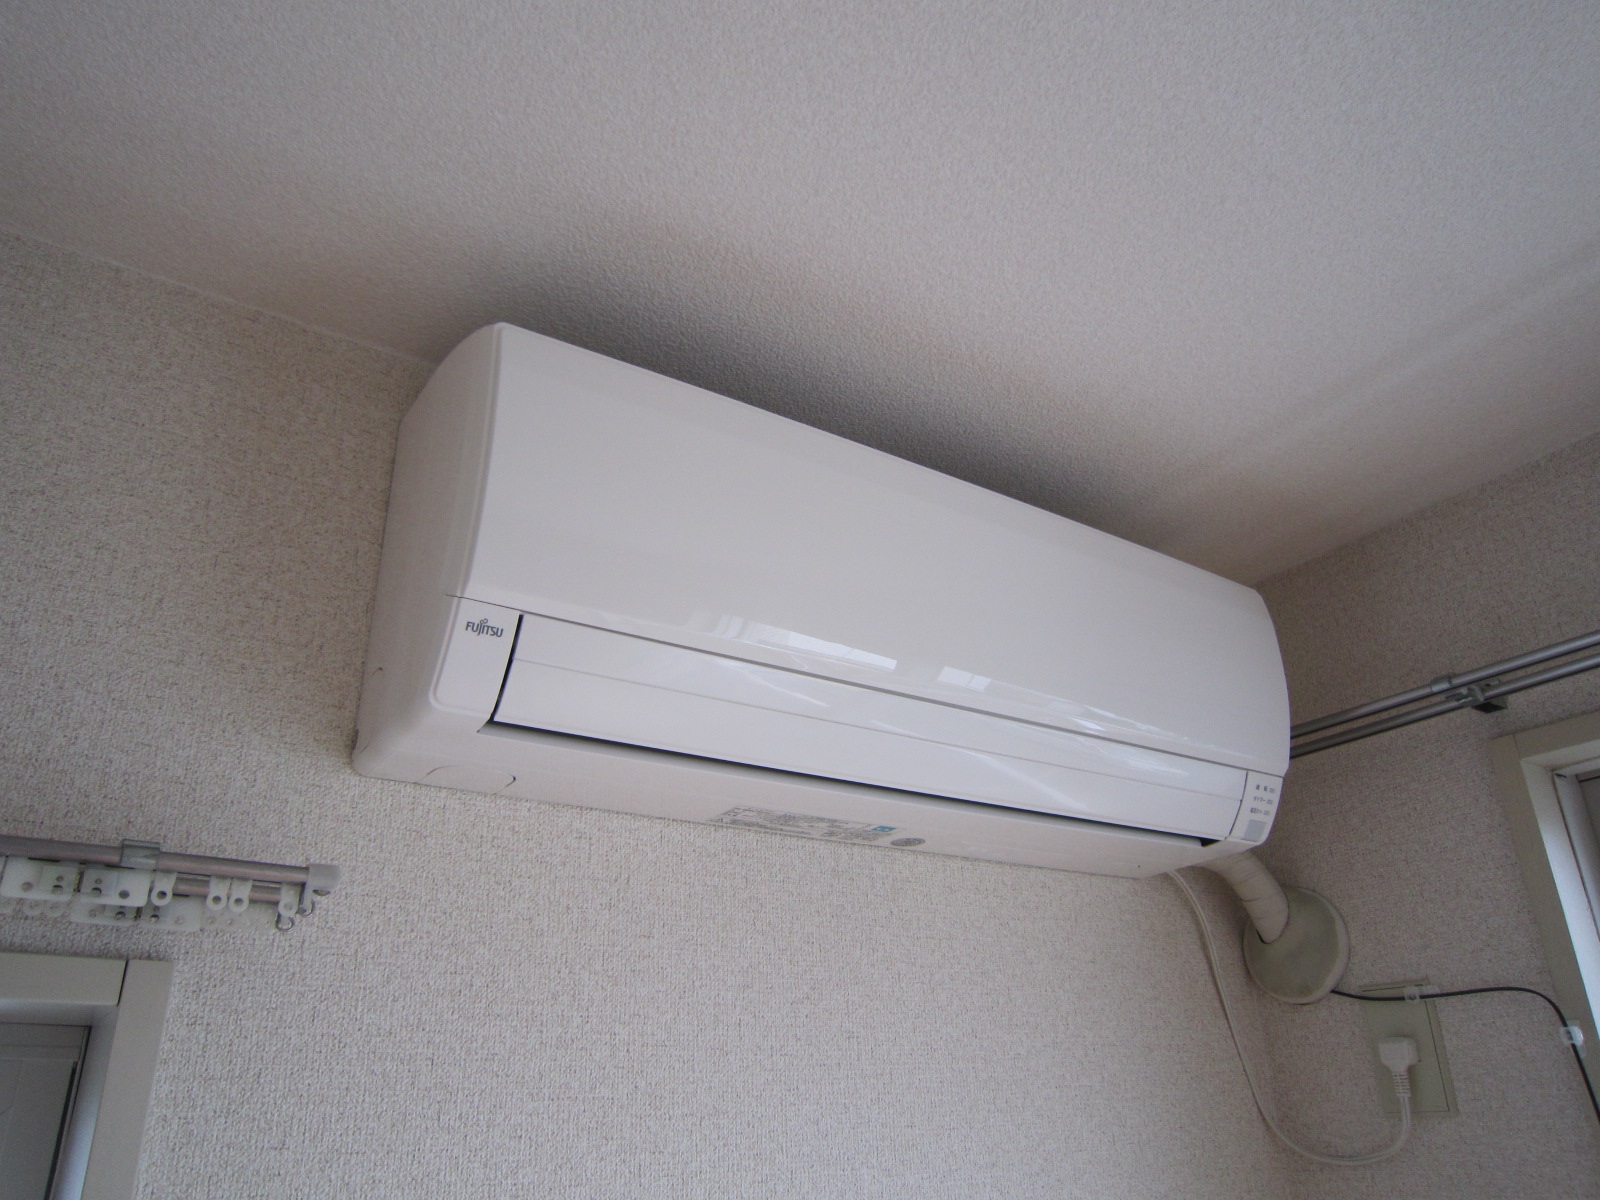 Other Equipment. Western-style air conditioning